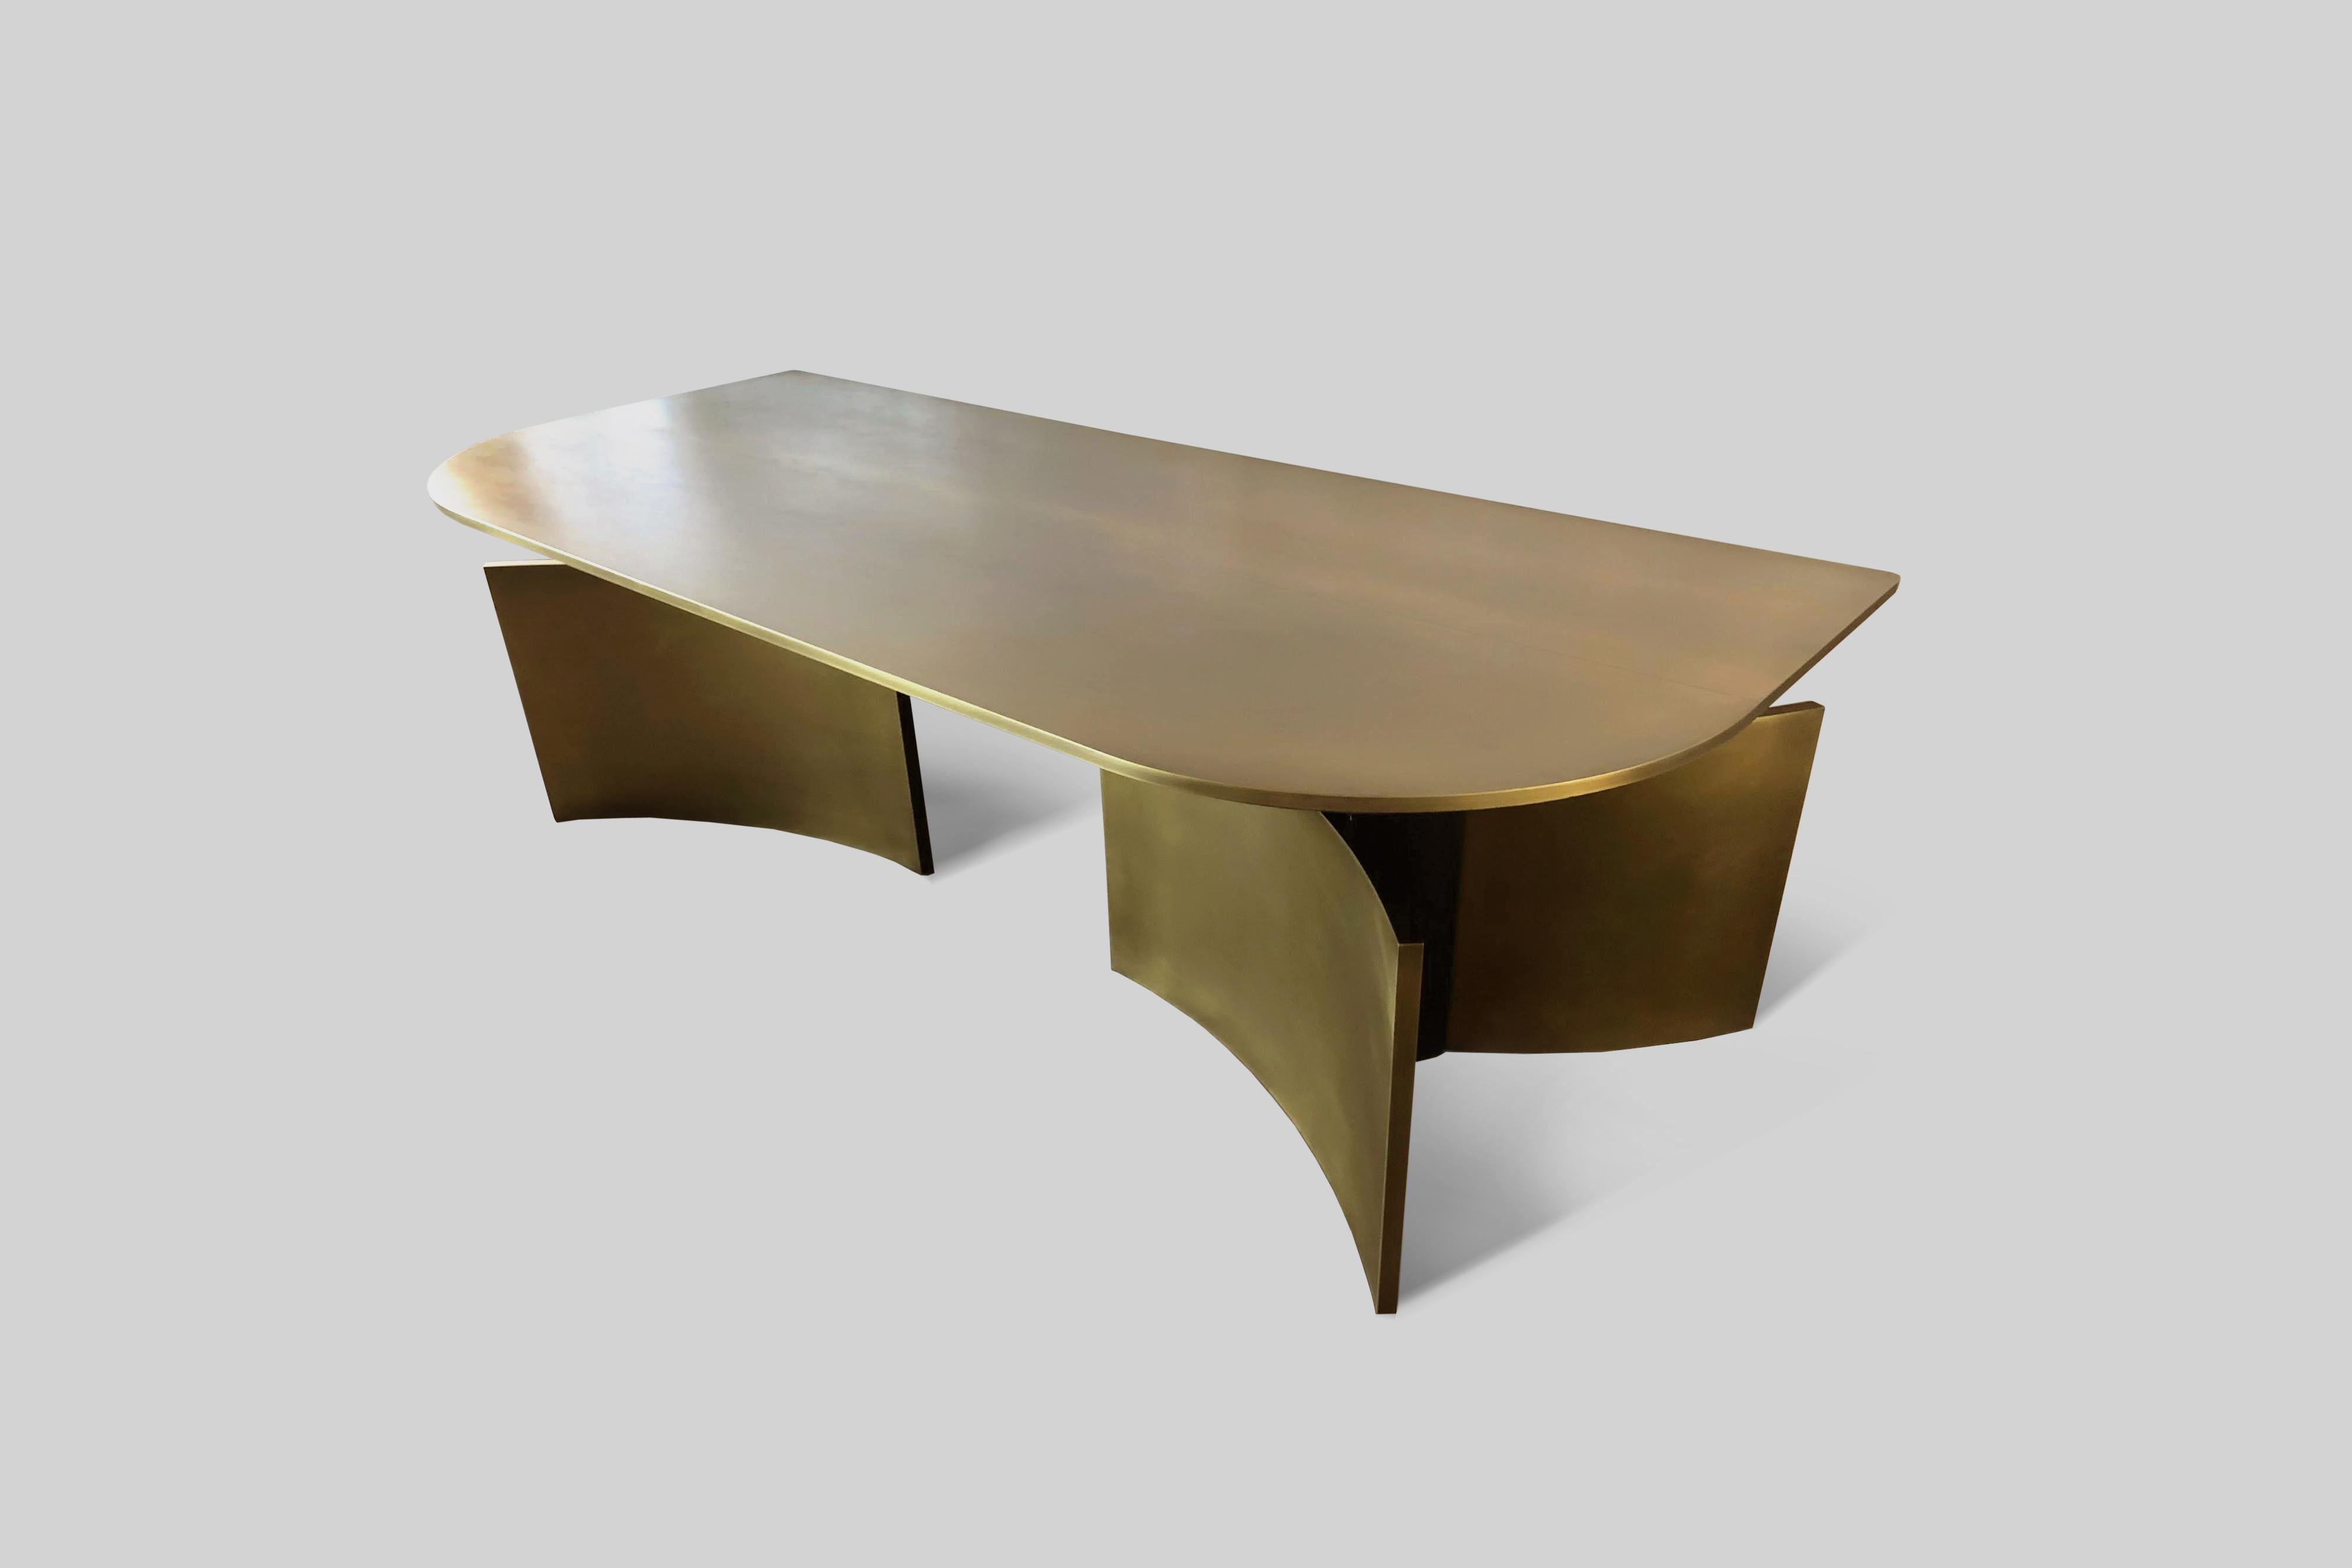 The Arca Desk in Plated Brass Structure by Alexander Diaz Anderson

Dimensions: 
L 244.0 cm/ 96.0